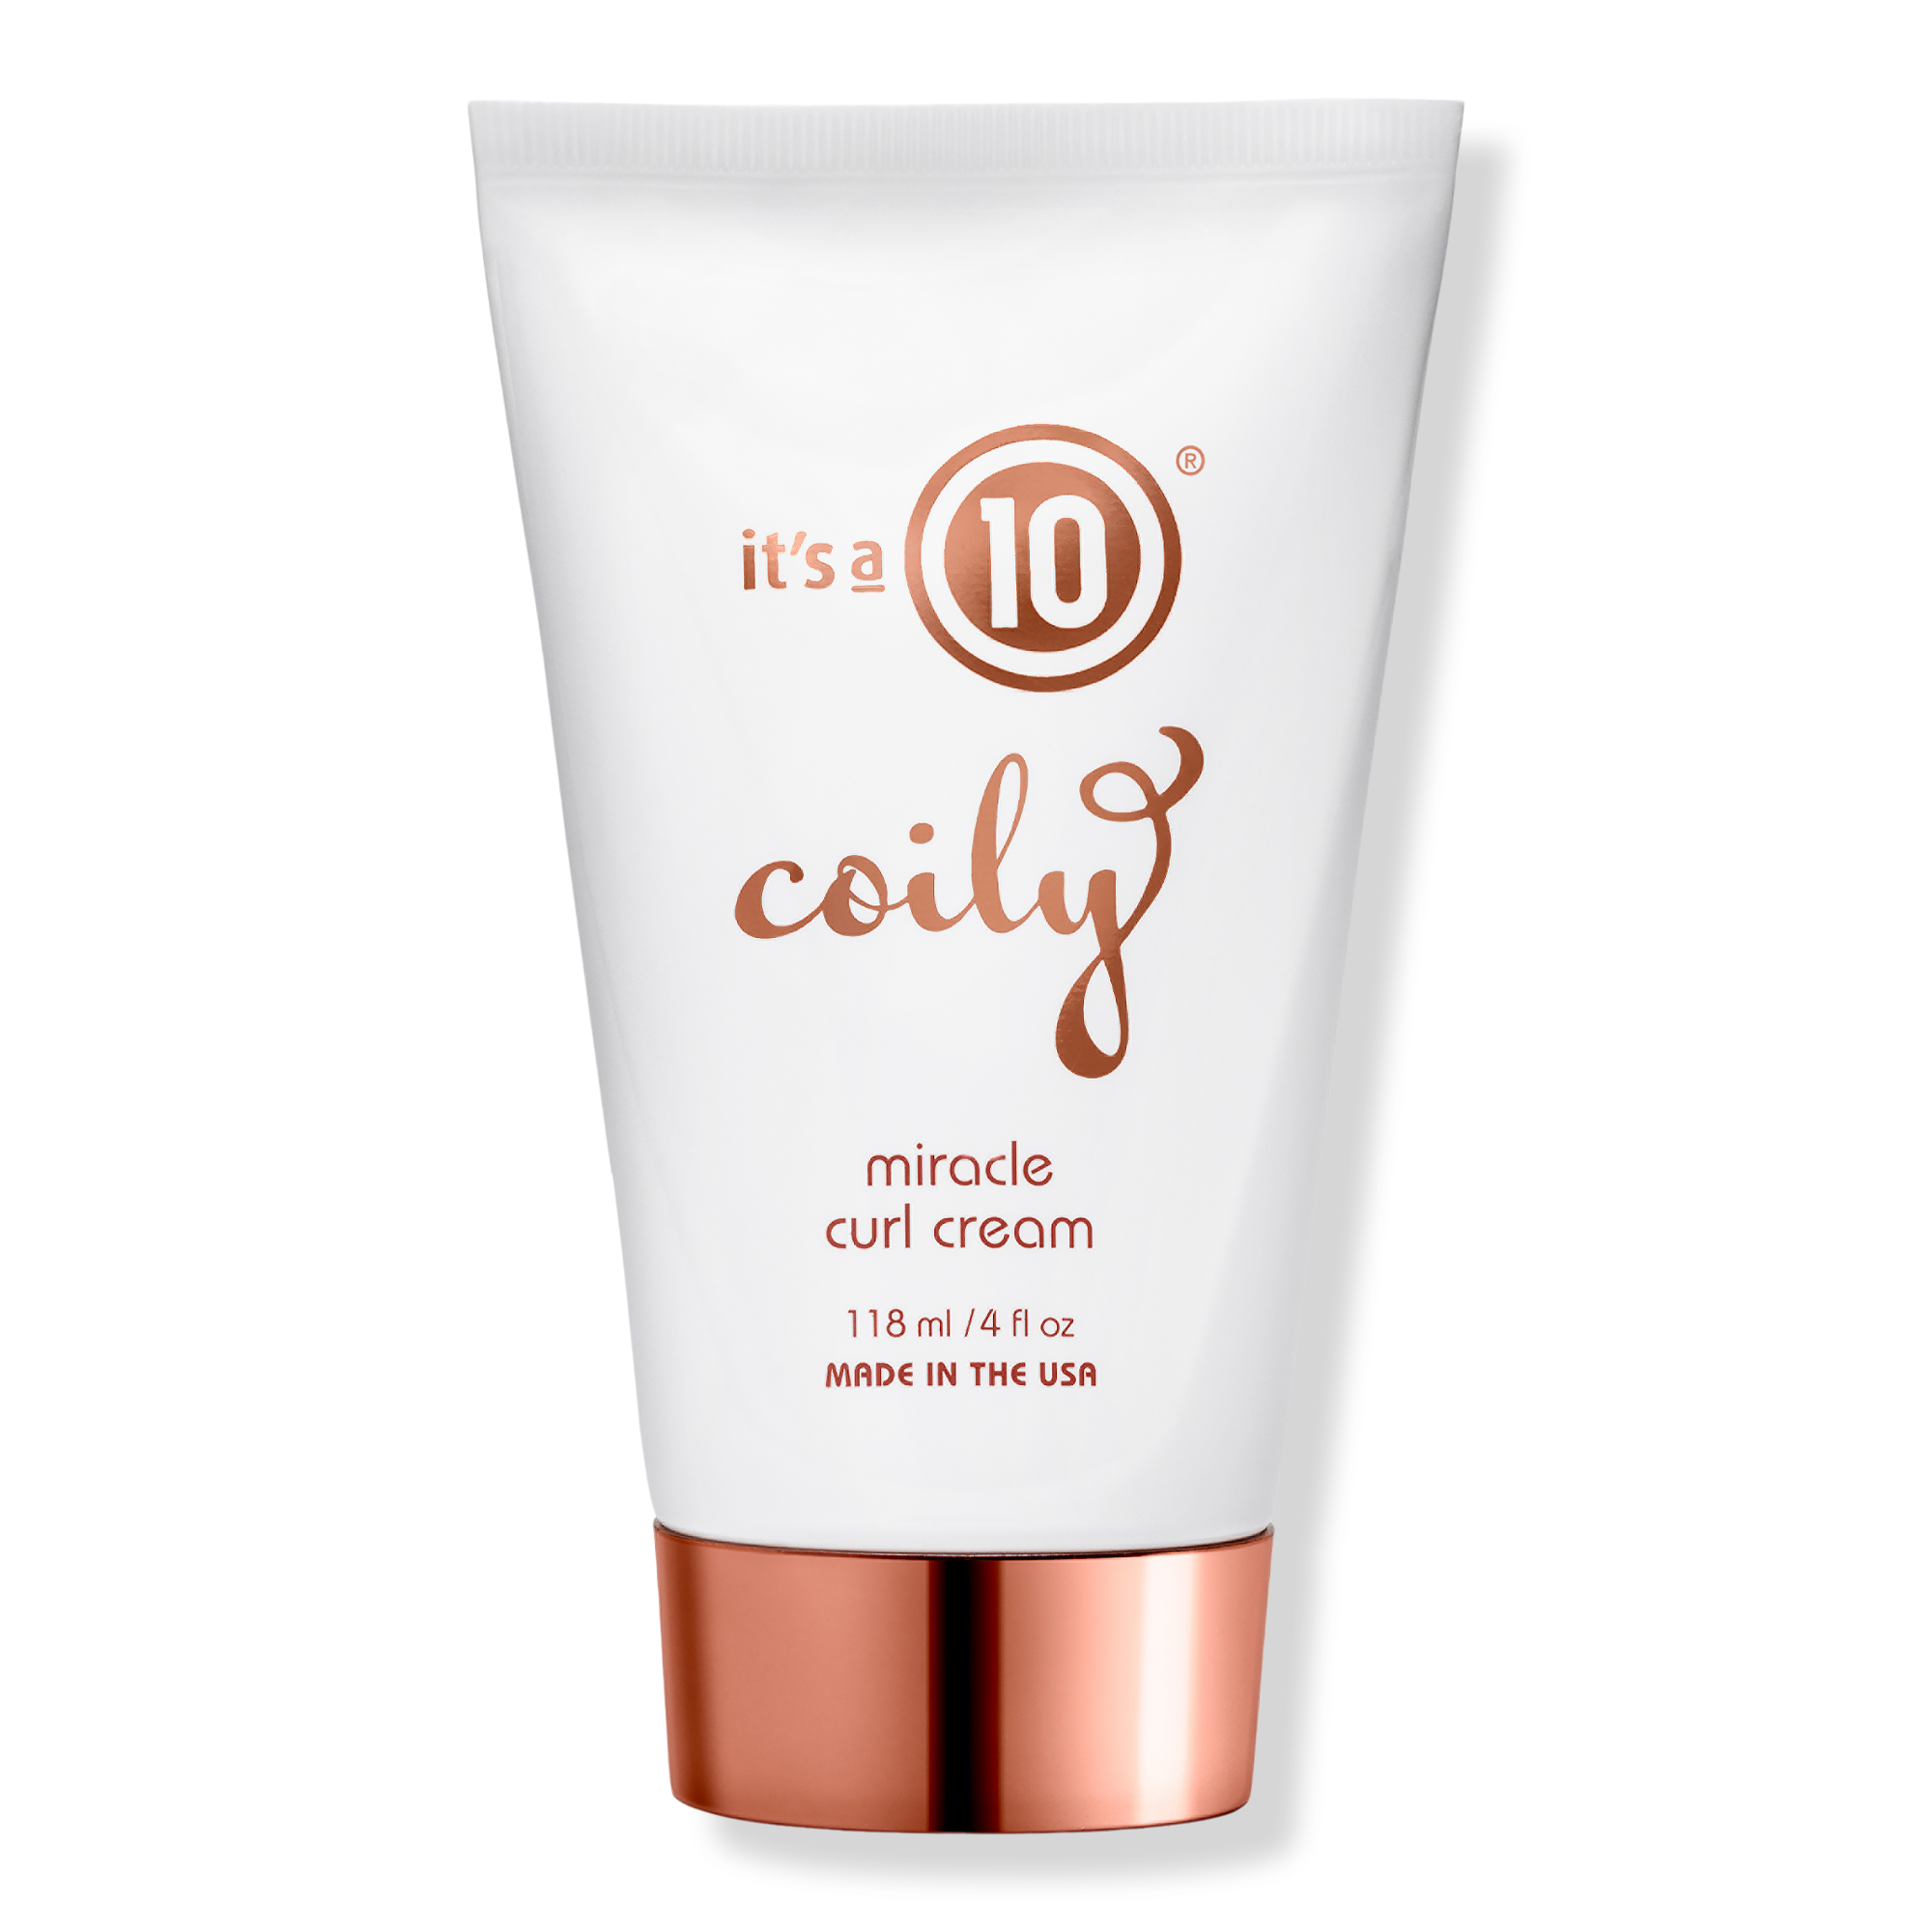 It's A 10 Coily Miracle Curl Cream / 4OZ